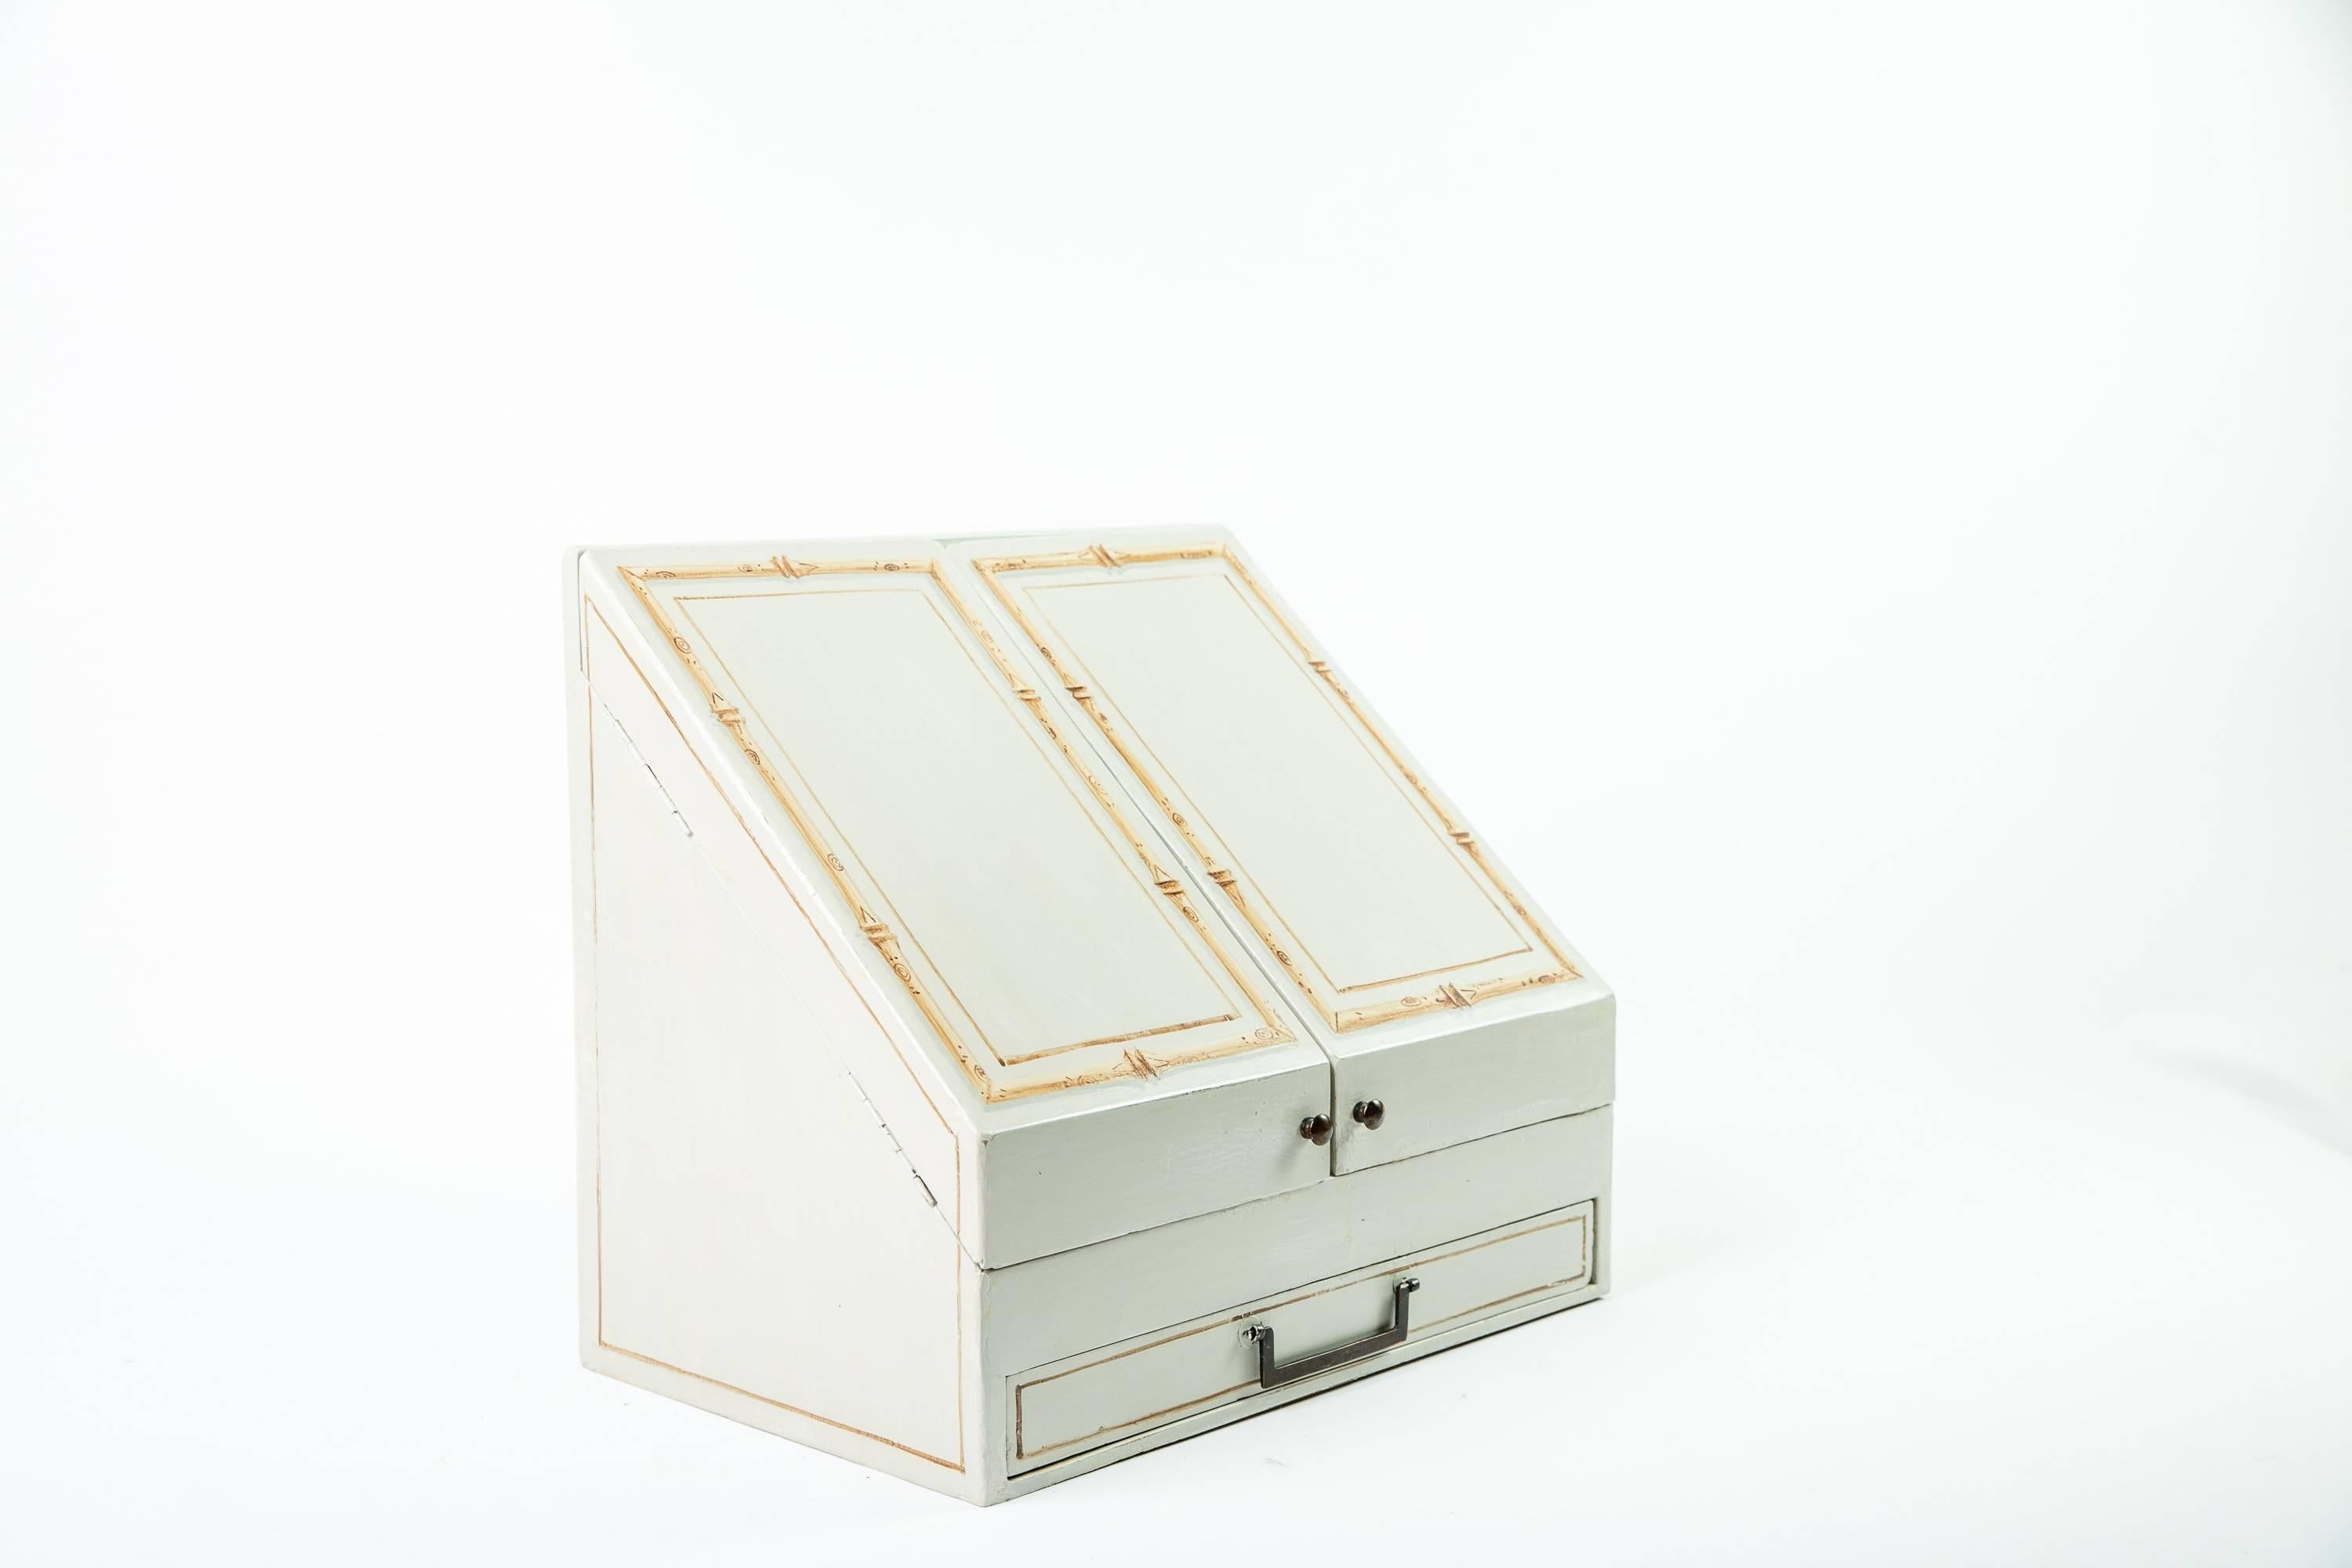 A grey-painted wood writing stationery caddy with ten compartments designed to contain a variety of writing utensils and notepaper. The interior of the box is concealed by two doors, each painted with trompe-l'oeil bamboo detail. Oil-rubbed bronze